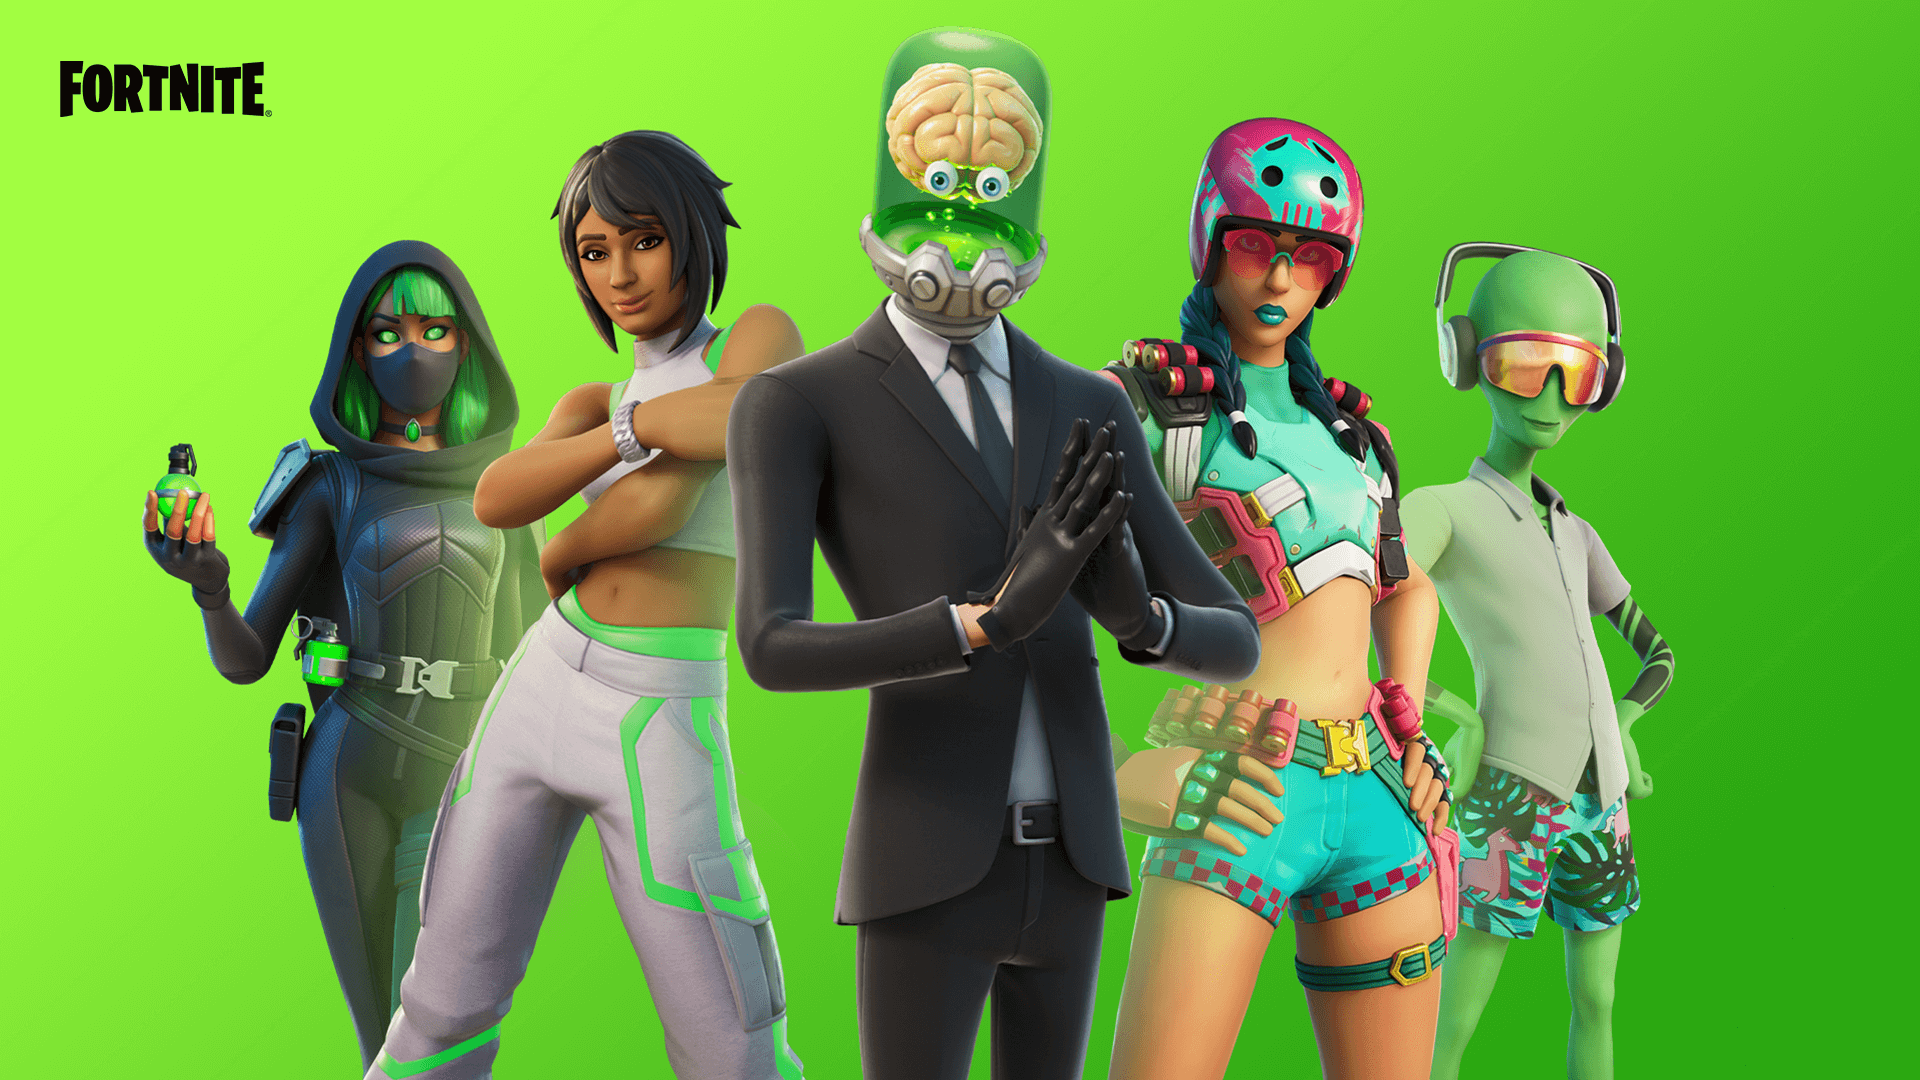 Different characters from fortnite with a green background